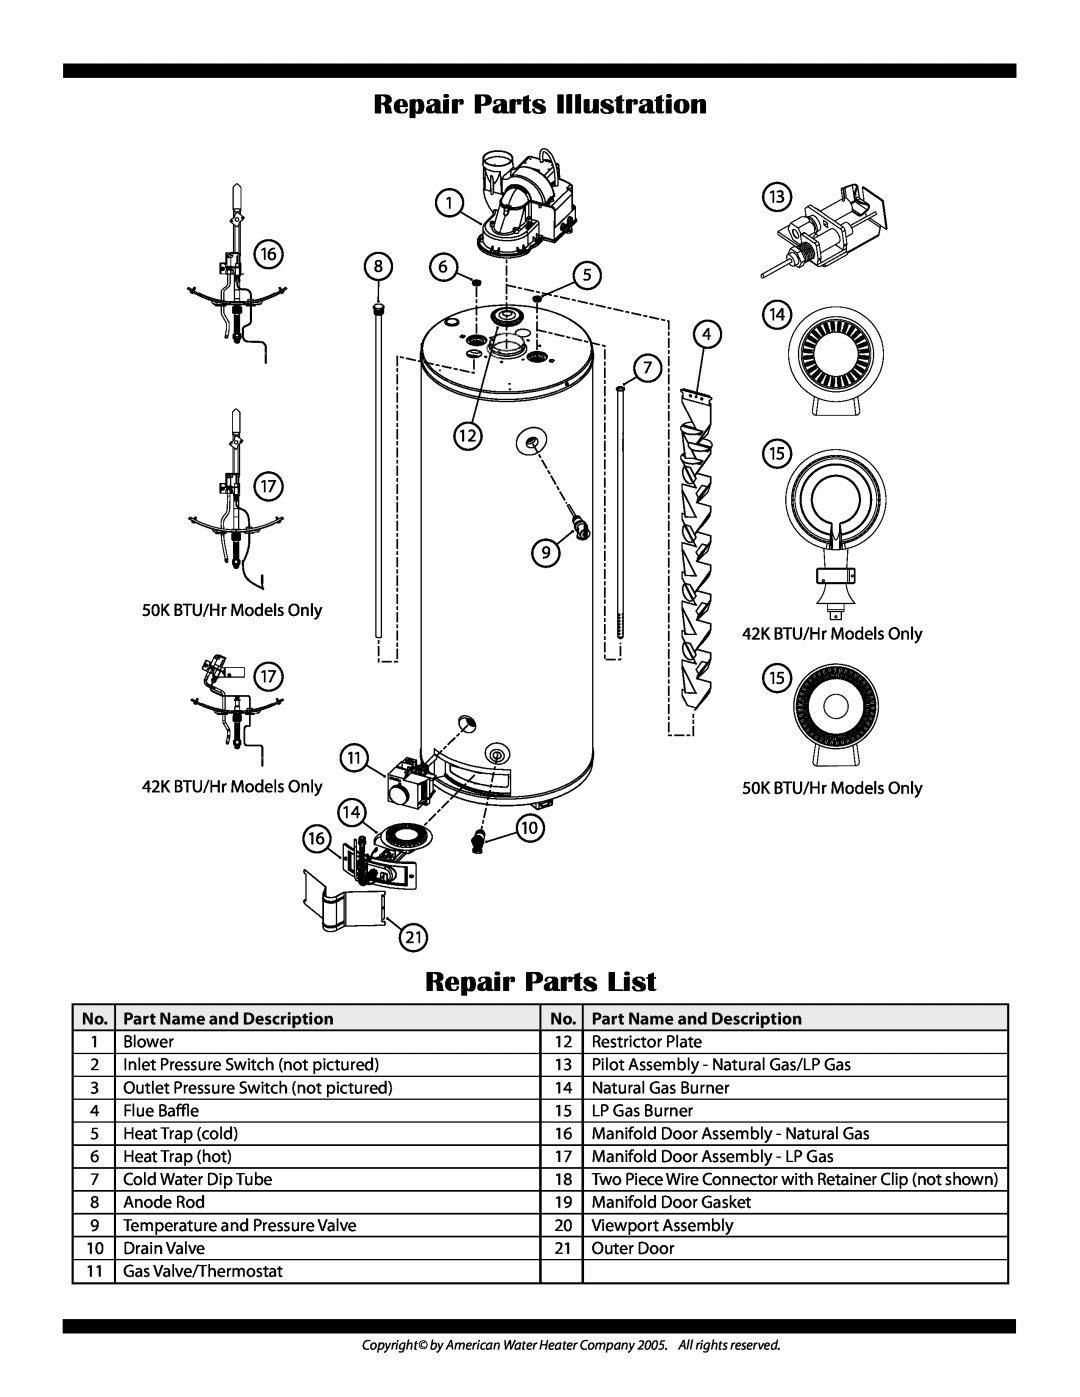 American Water Heater PDVG-50T60, PVG-40T42 manual Repair Parts Illustration Repair Parts List, Part Name and Description 